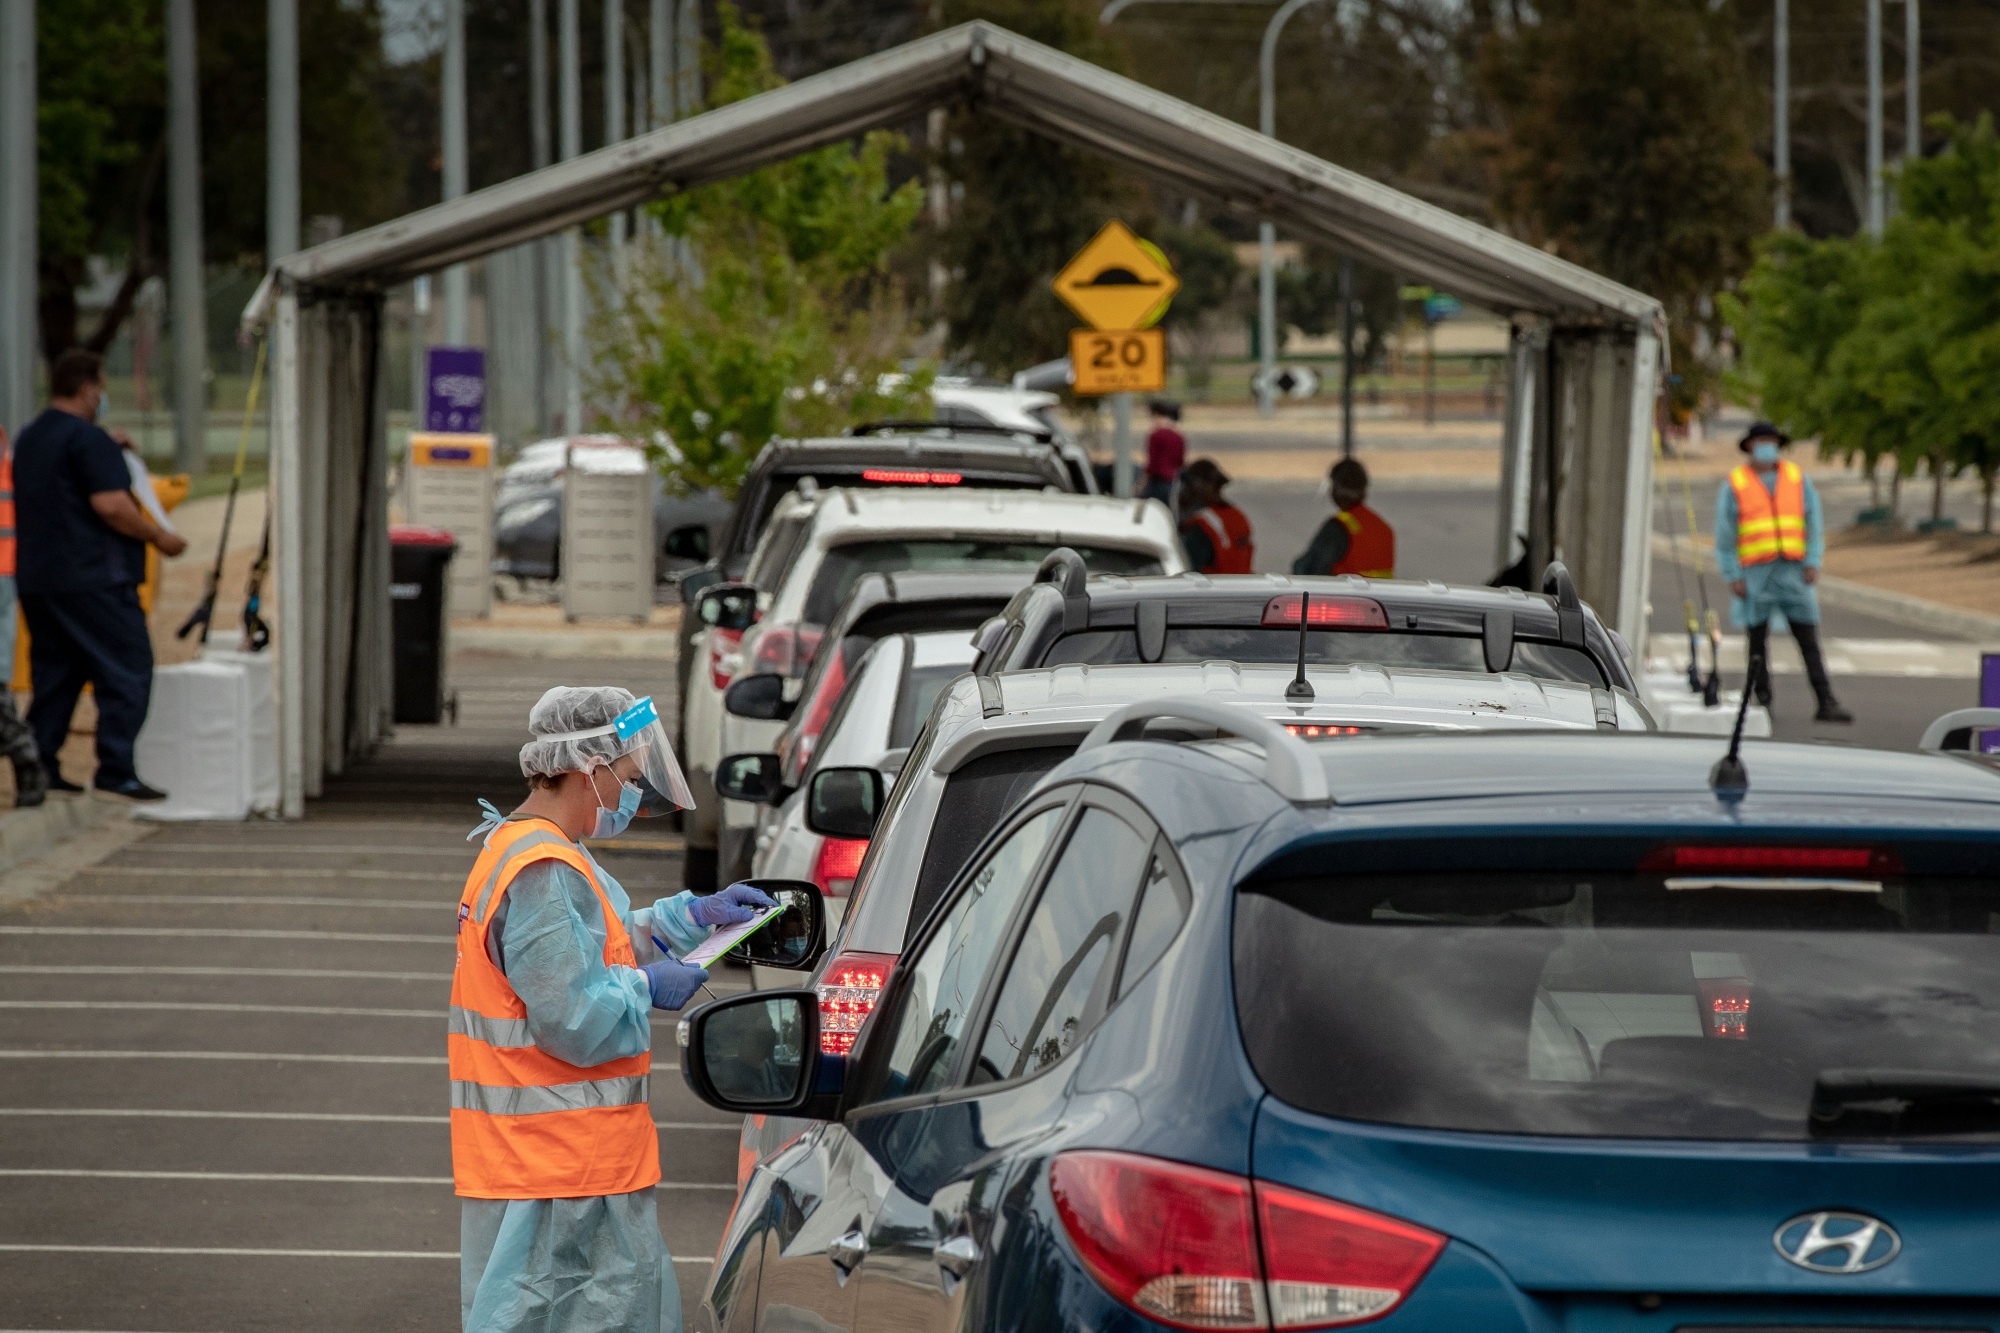 People get tested for Covid-19 at a drive through testing clinic in Shepparton, Australia on Oct. 15.